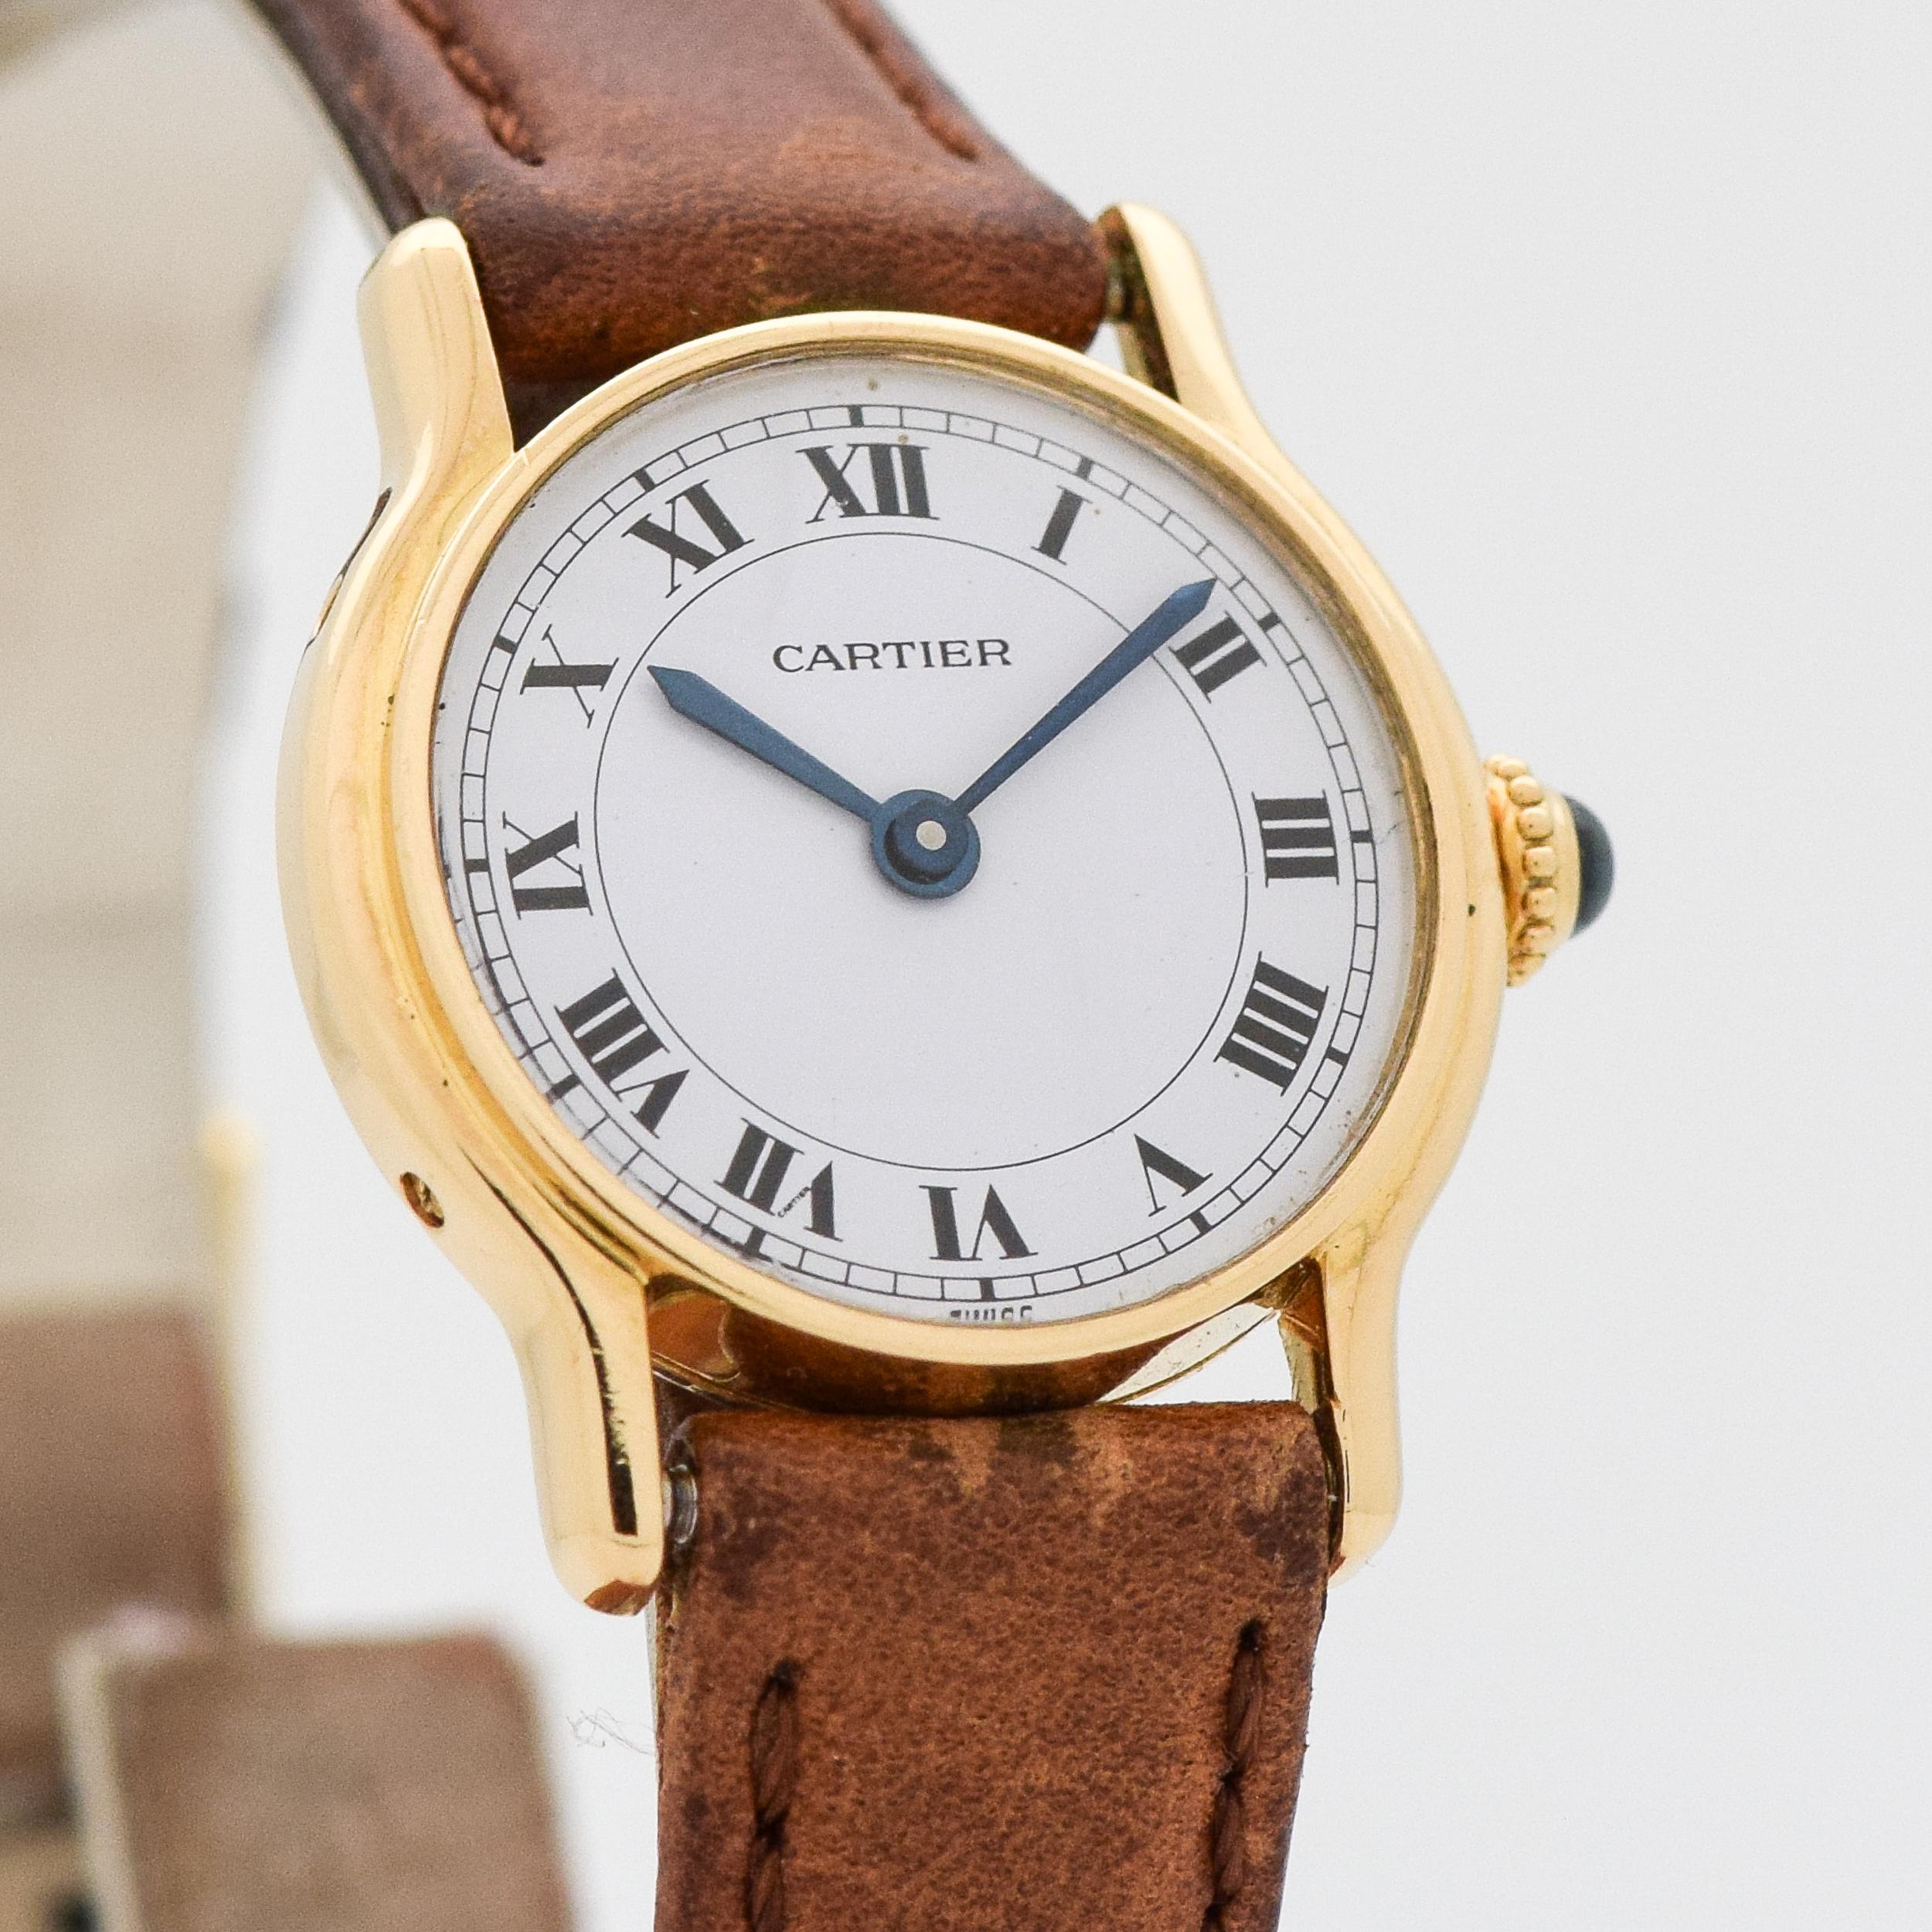 2000's Cartier Ladies Round-shaped 18k Yellow Gold watch with Original White Dial with Black Roman Numerals. Rare. 23mm x 27mm lug to lug (0.91 in. x 1.06 in.) - 17 jewel, manual caliber ETA movement. Genuine Leather Brown-colored Watch Strap. 